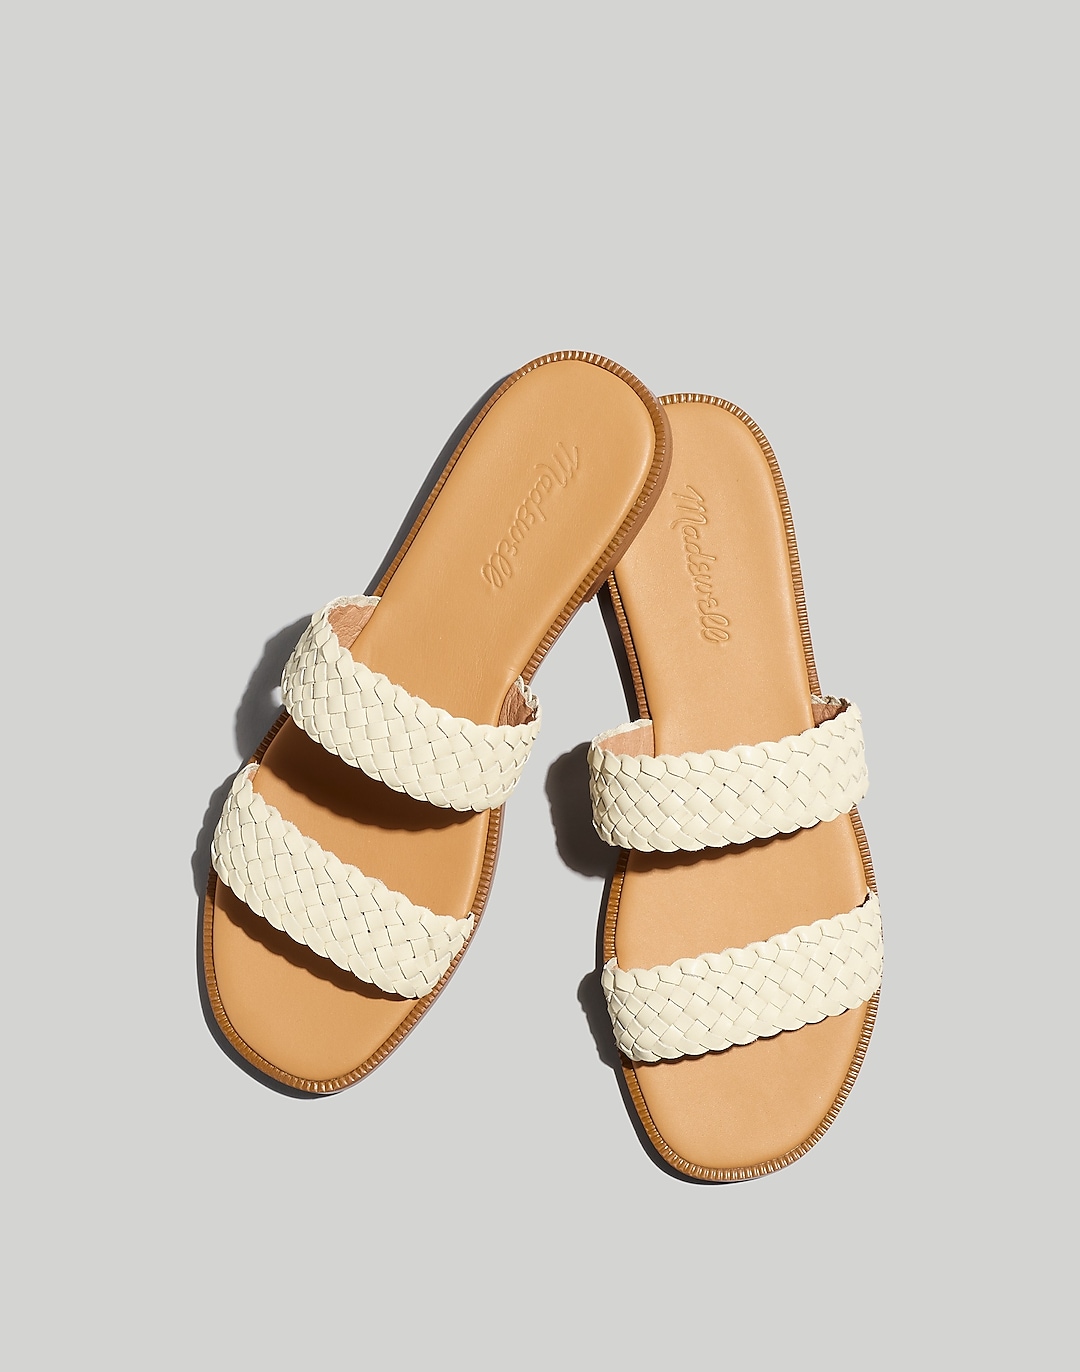 The Teagan Slide Sandal in Leather | Madewell